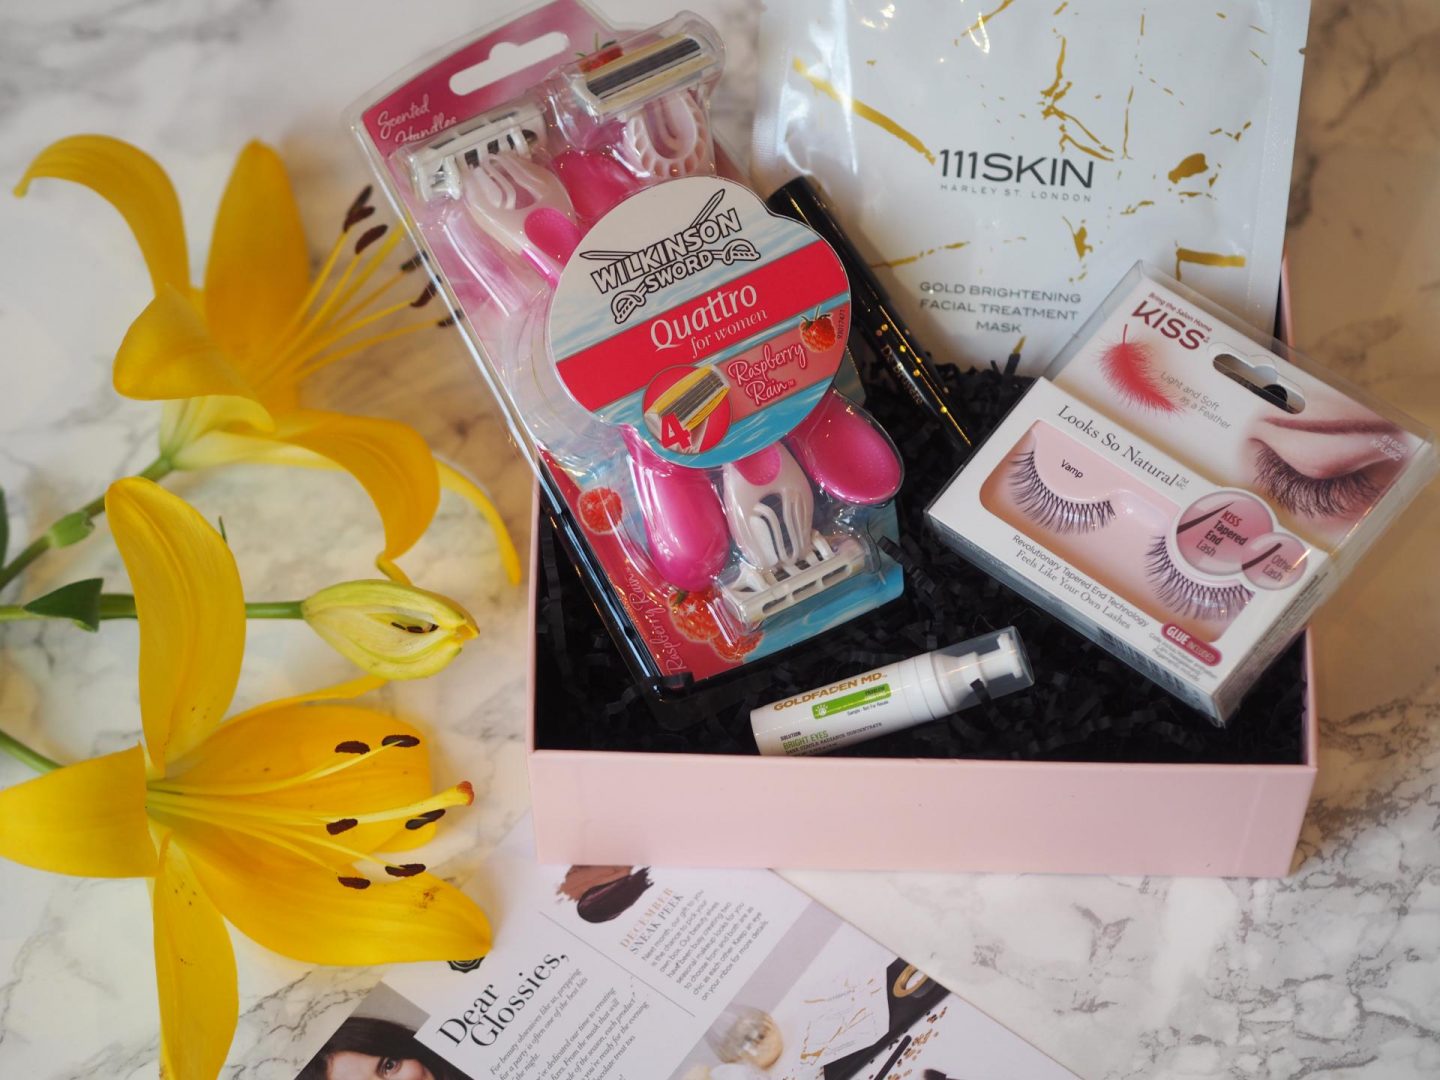 November ‘Prep and Prime’ Glossybox: Unboxing!